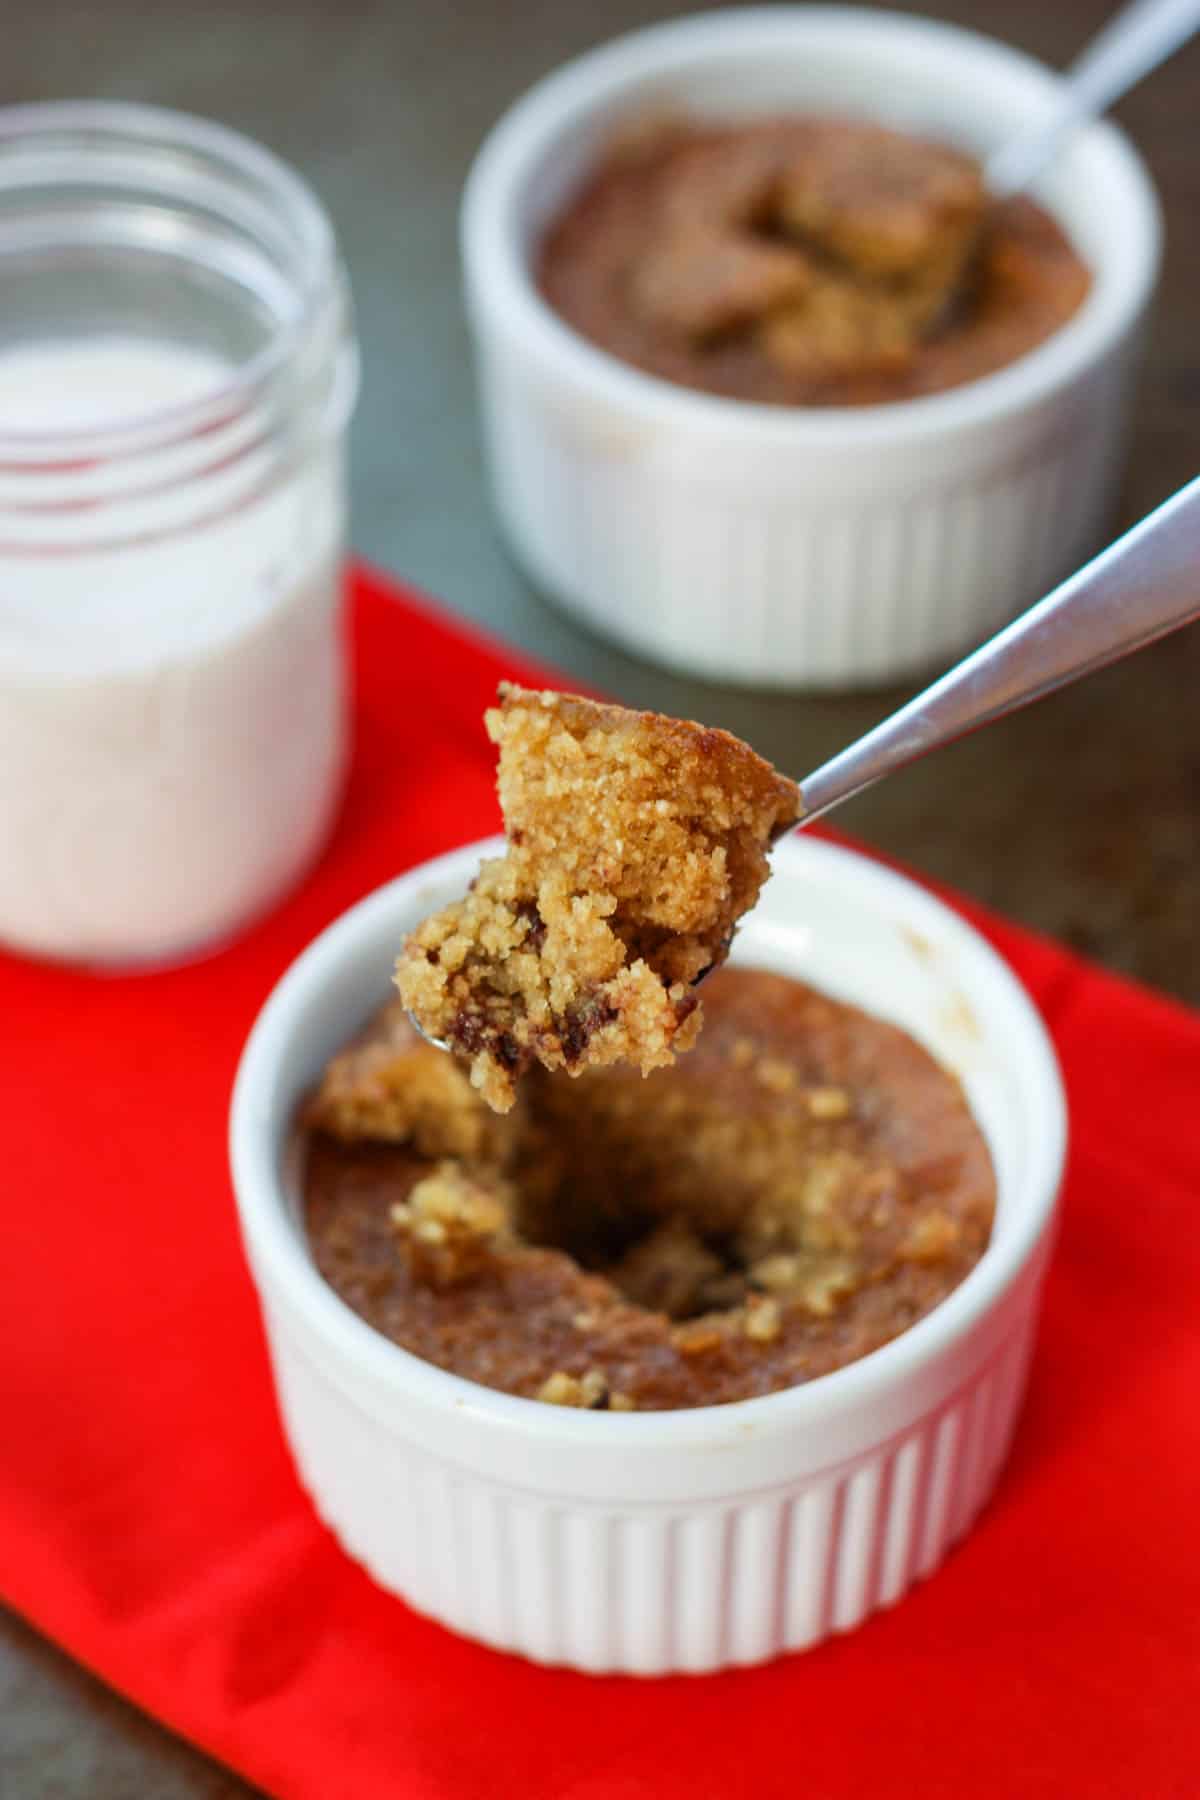 A spoon lifts out a bit of chocolate chip cookie in a mug from a white ramekin.